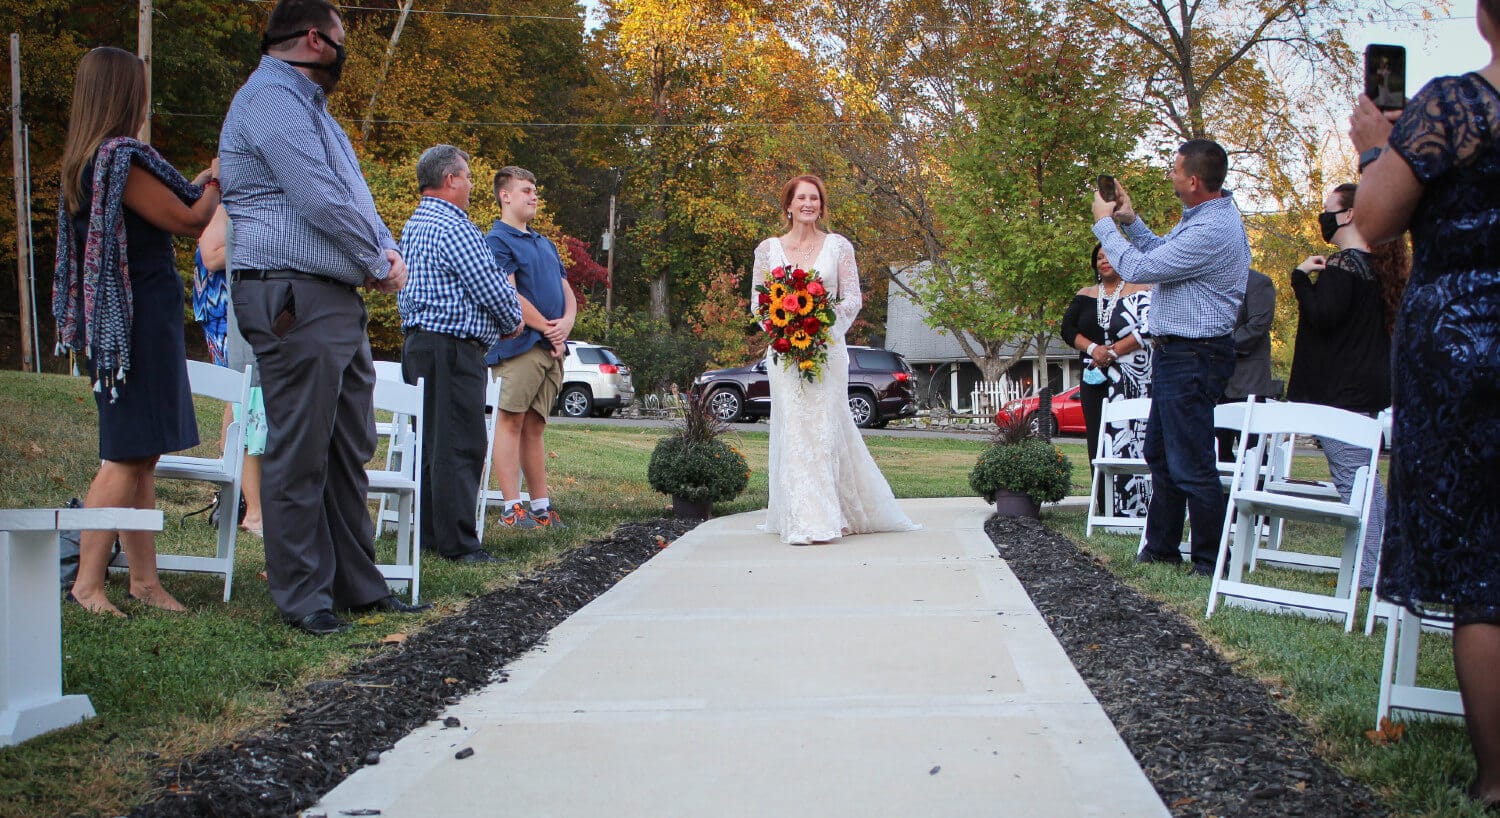 bride walking down aisle with guests standing by white chairs on both sides taking pictures with cell phones